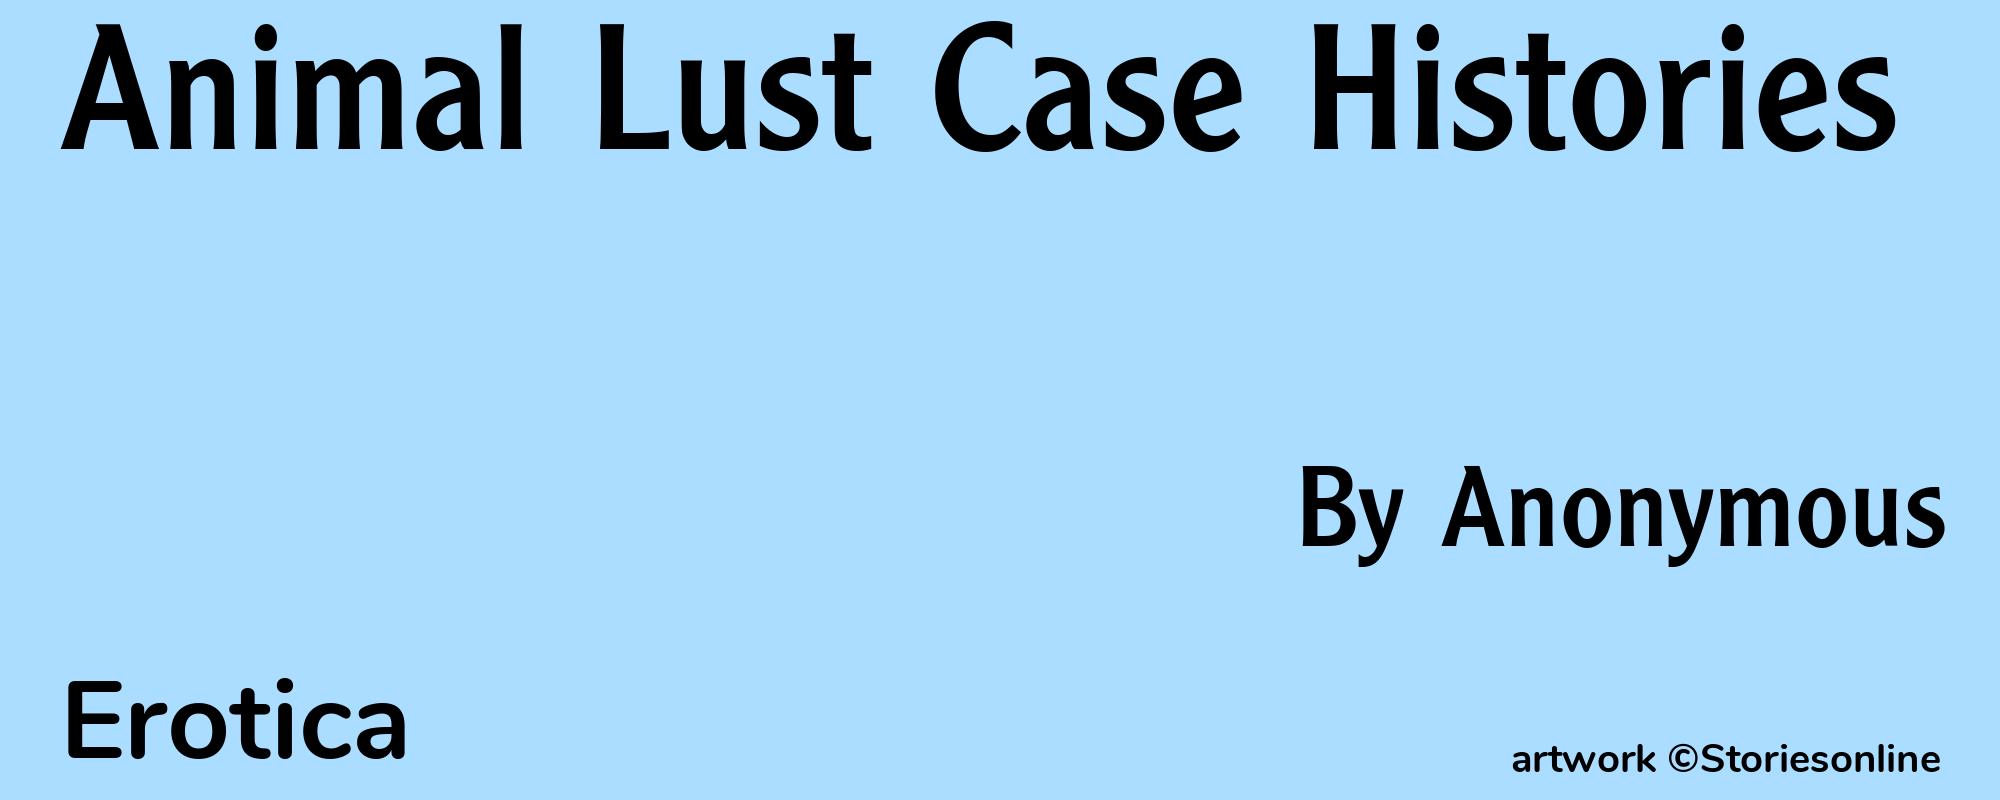 Animal Lust Case Histories - Cover